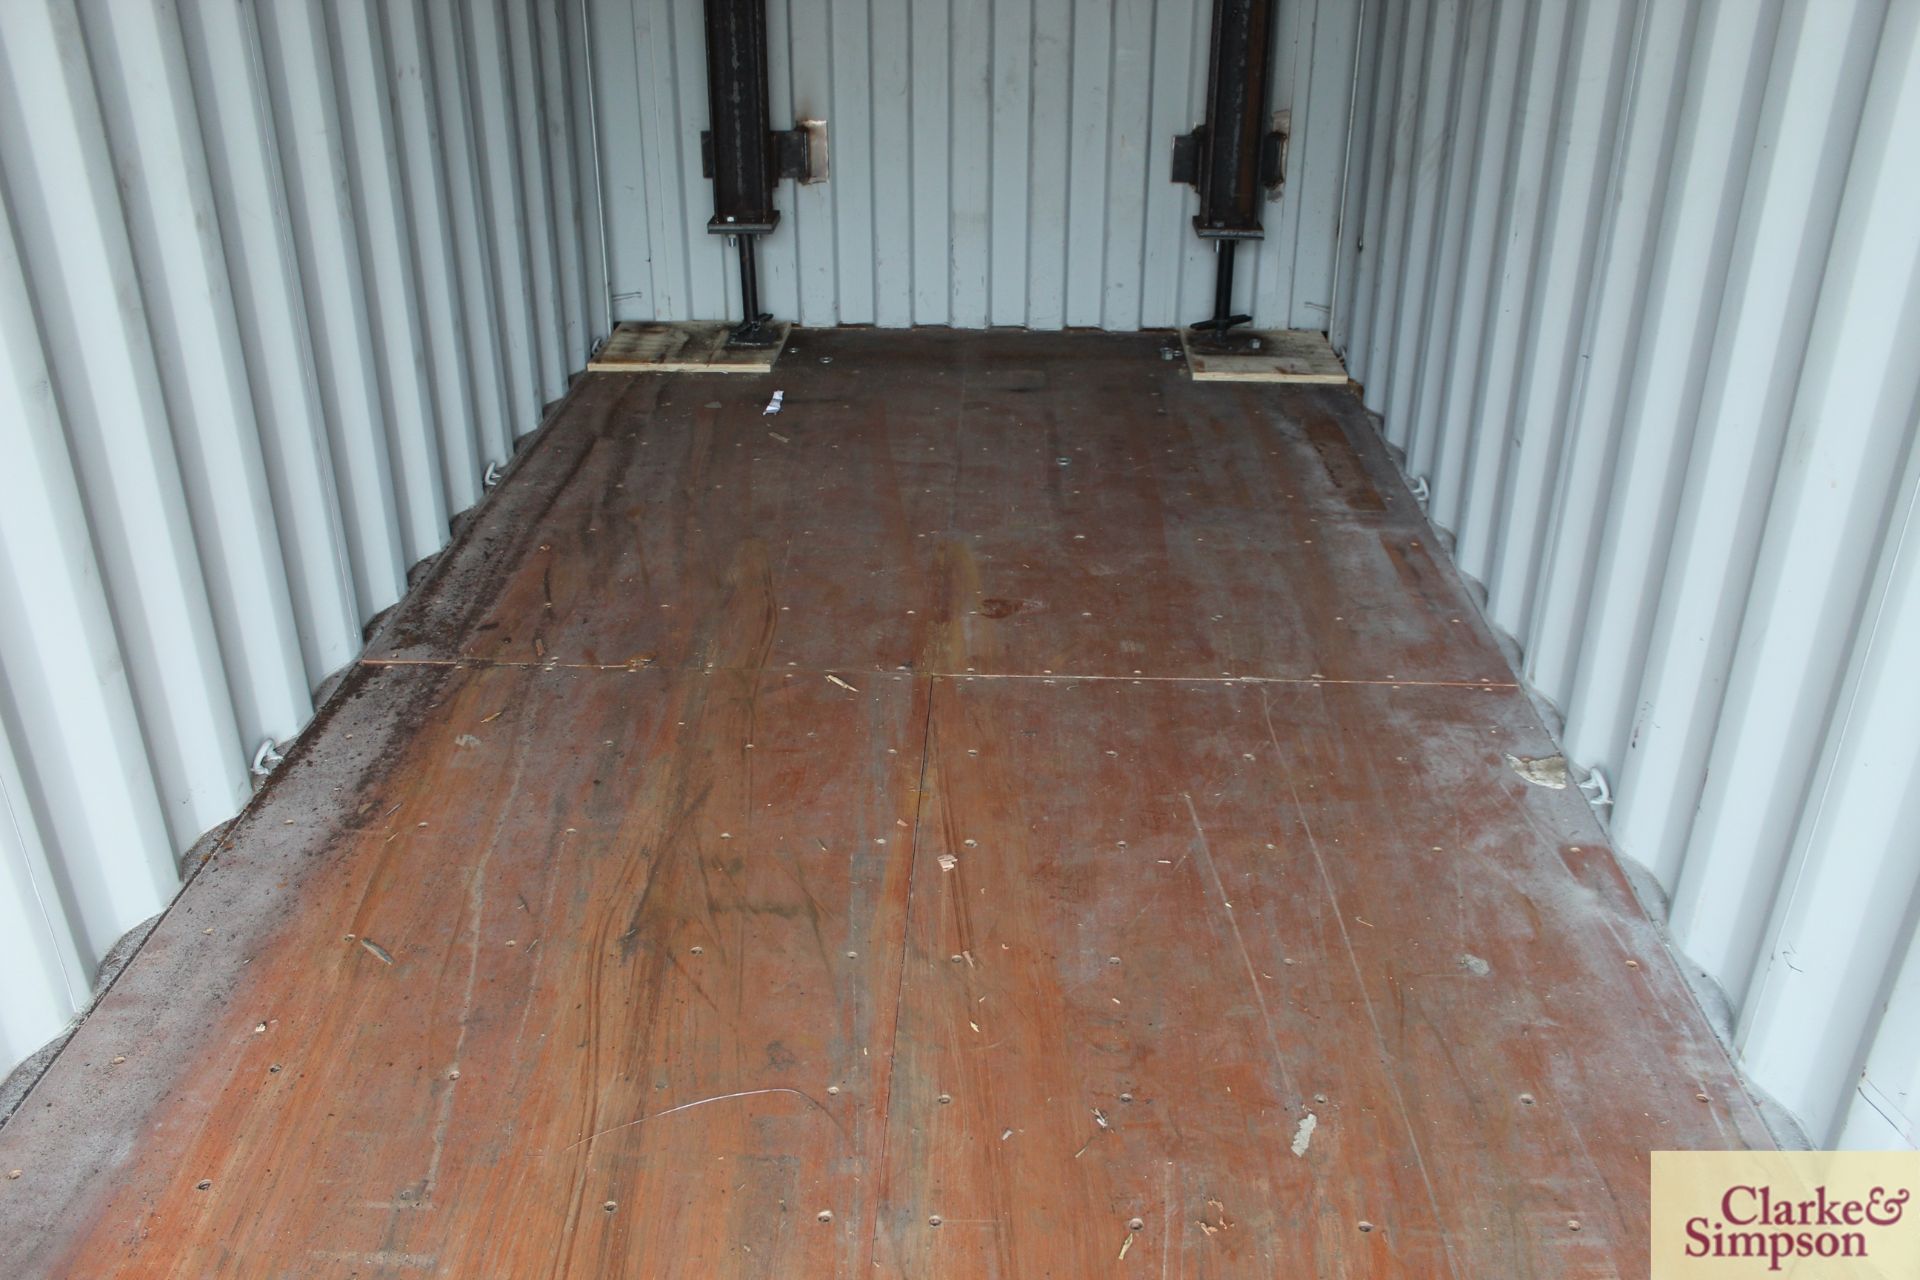 20ft x 9ft6in high shipping container. 2019. Partially reinforced to interior to include plates - Image 17 of 19